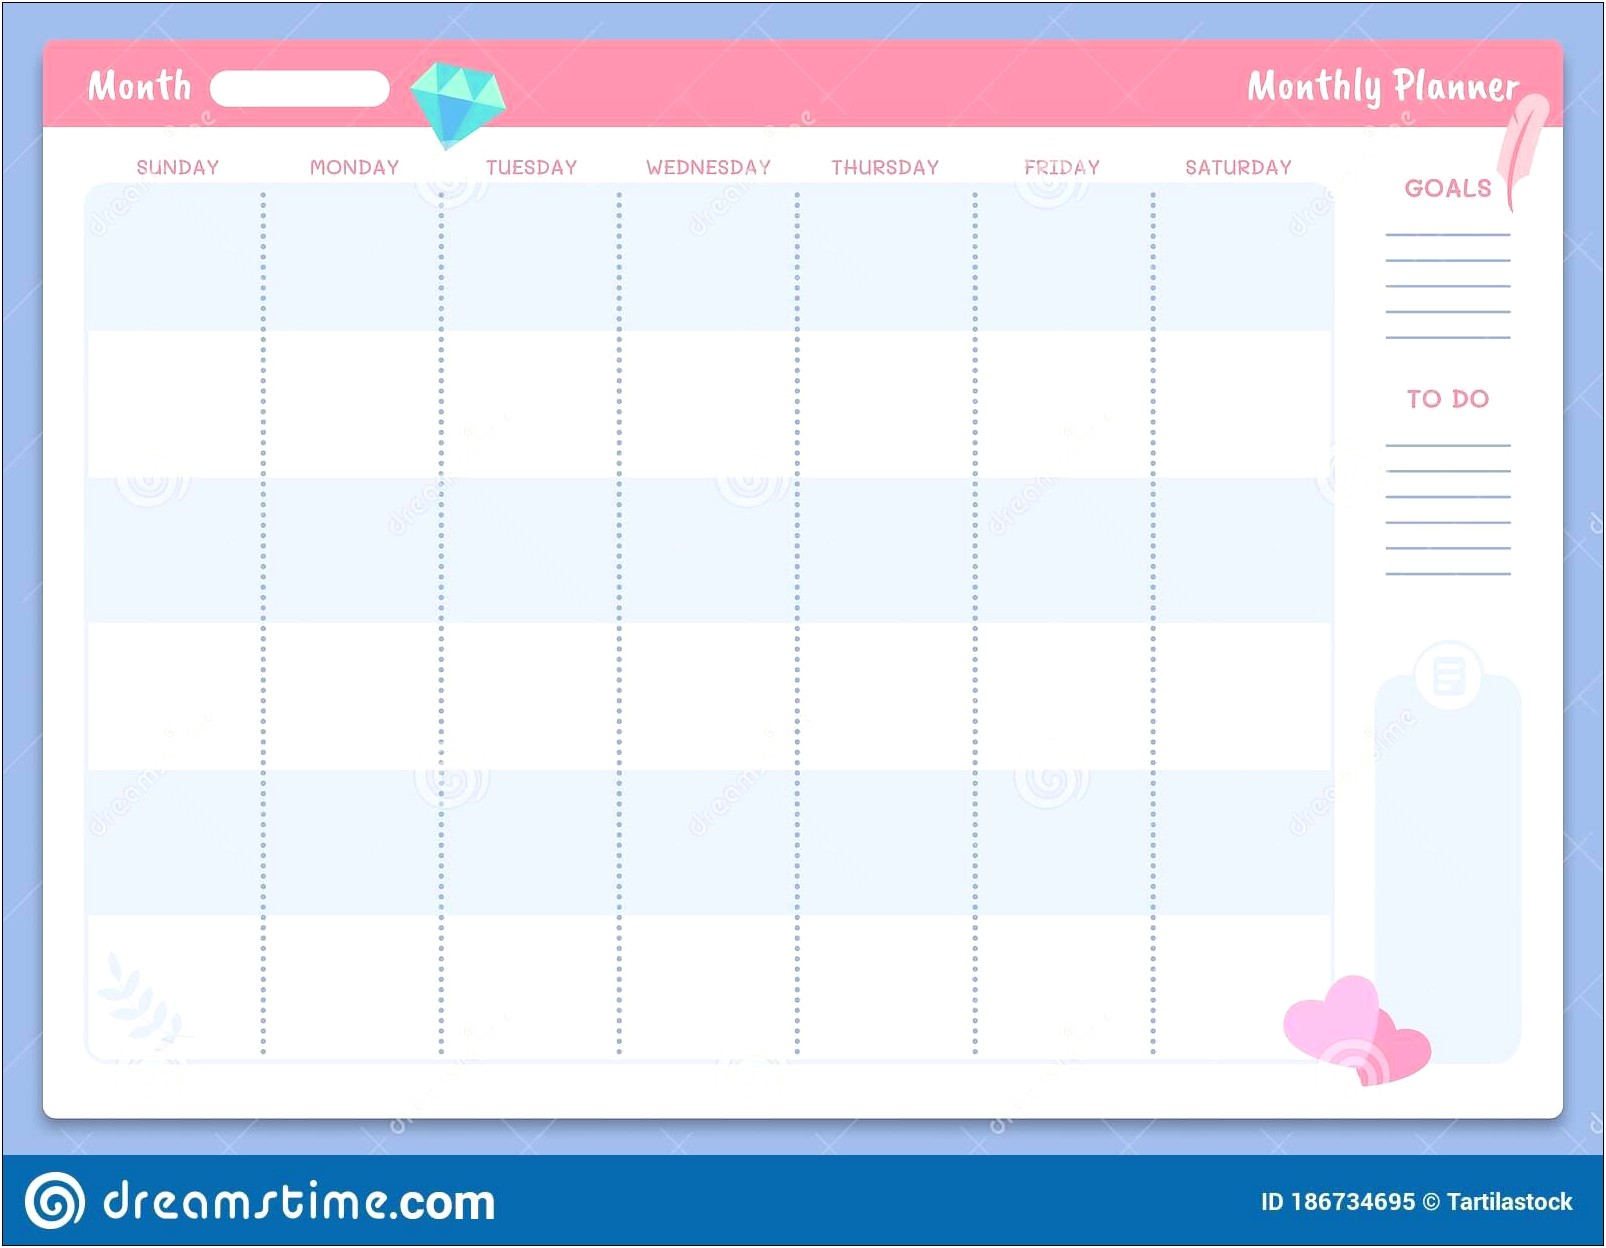 Printable Free Template For Taking Monthly Notes